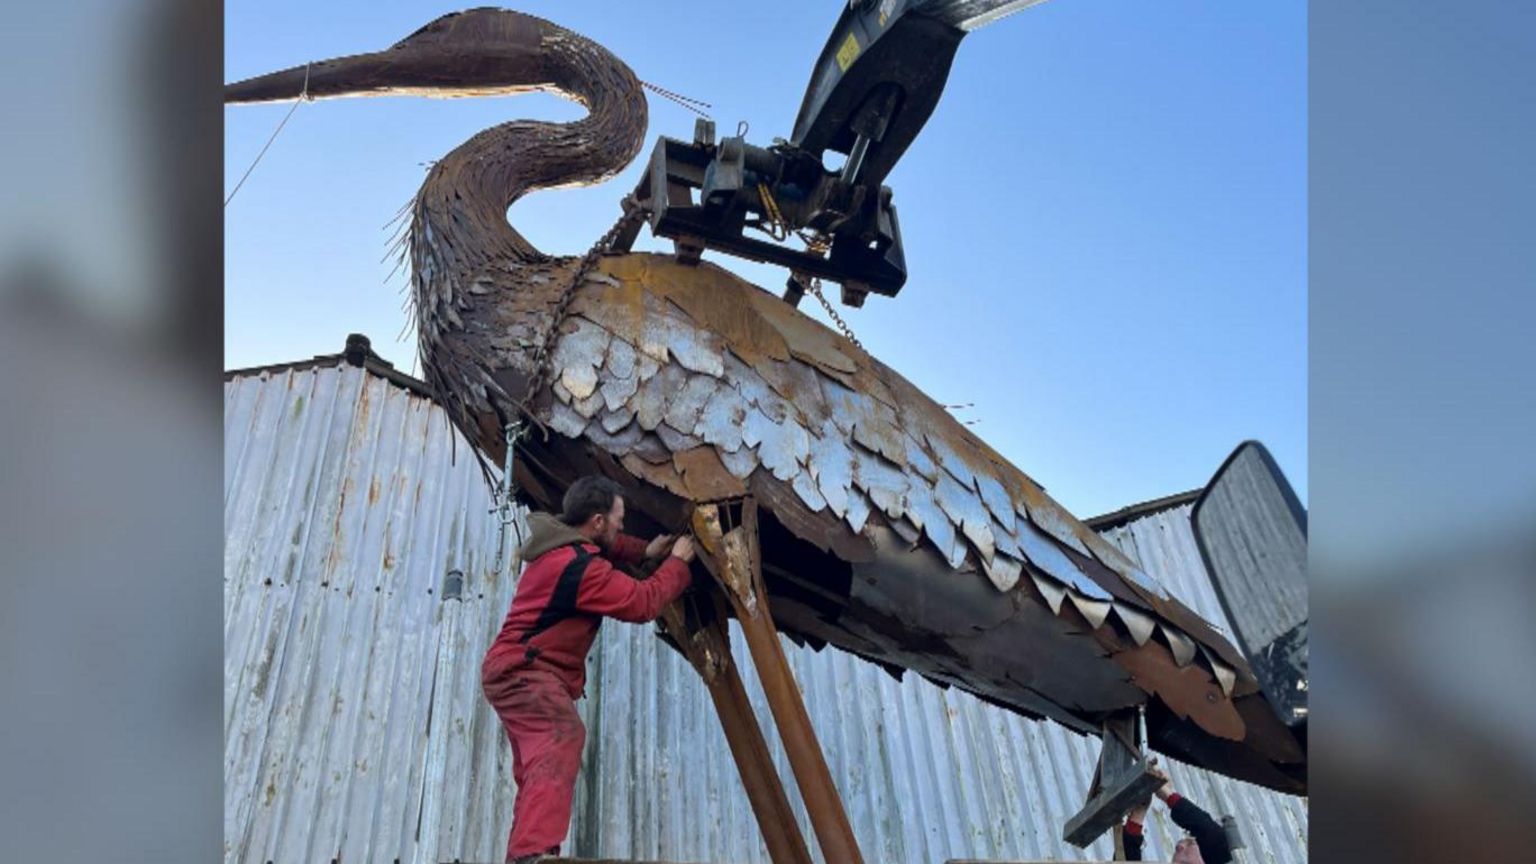 A man working on a giant sculpture Heron